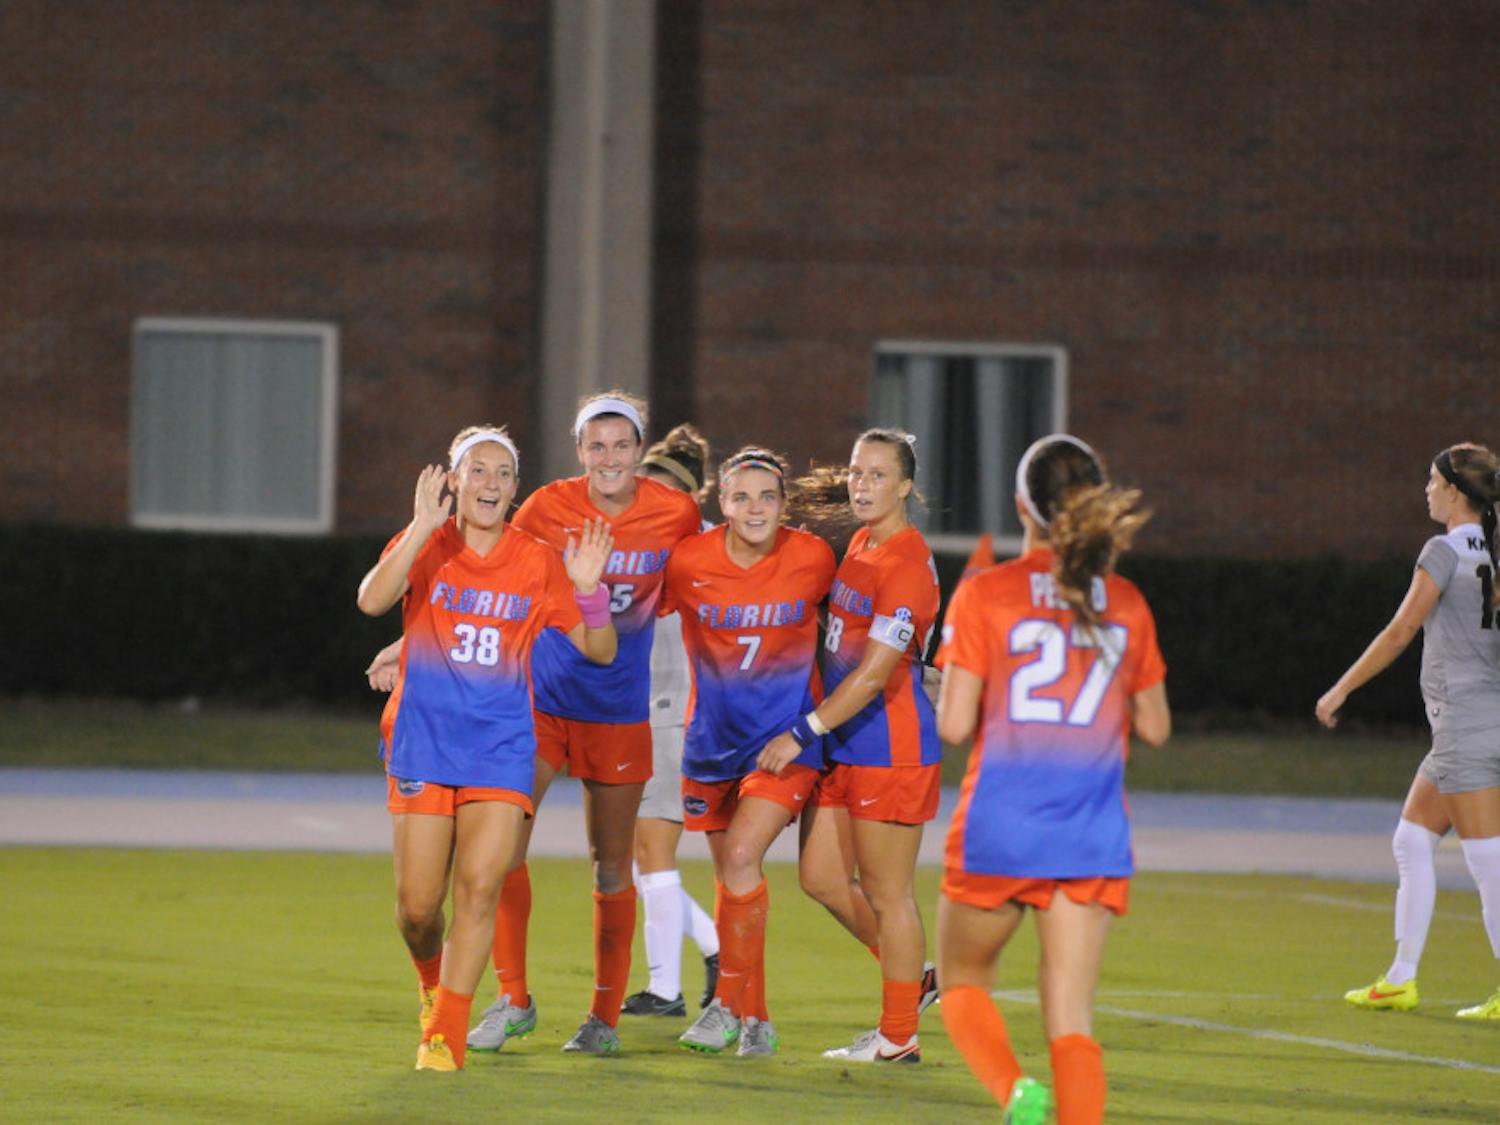 Gabby Seiler (38) celebrates with teammates during Florida's 3-2 win over UCF on Sept. 18 at James G. Pressly Stadium.